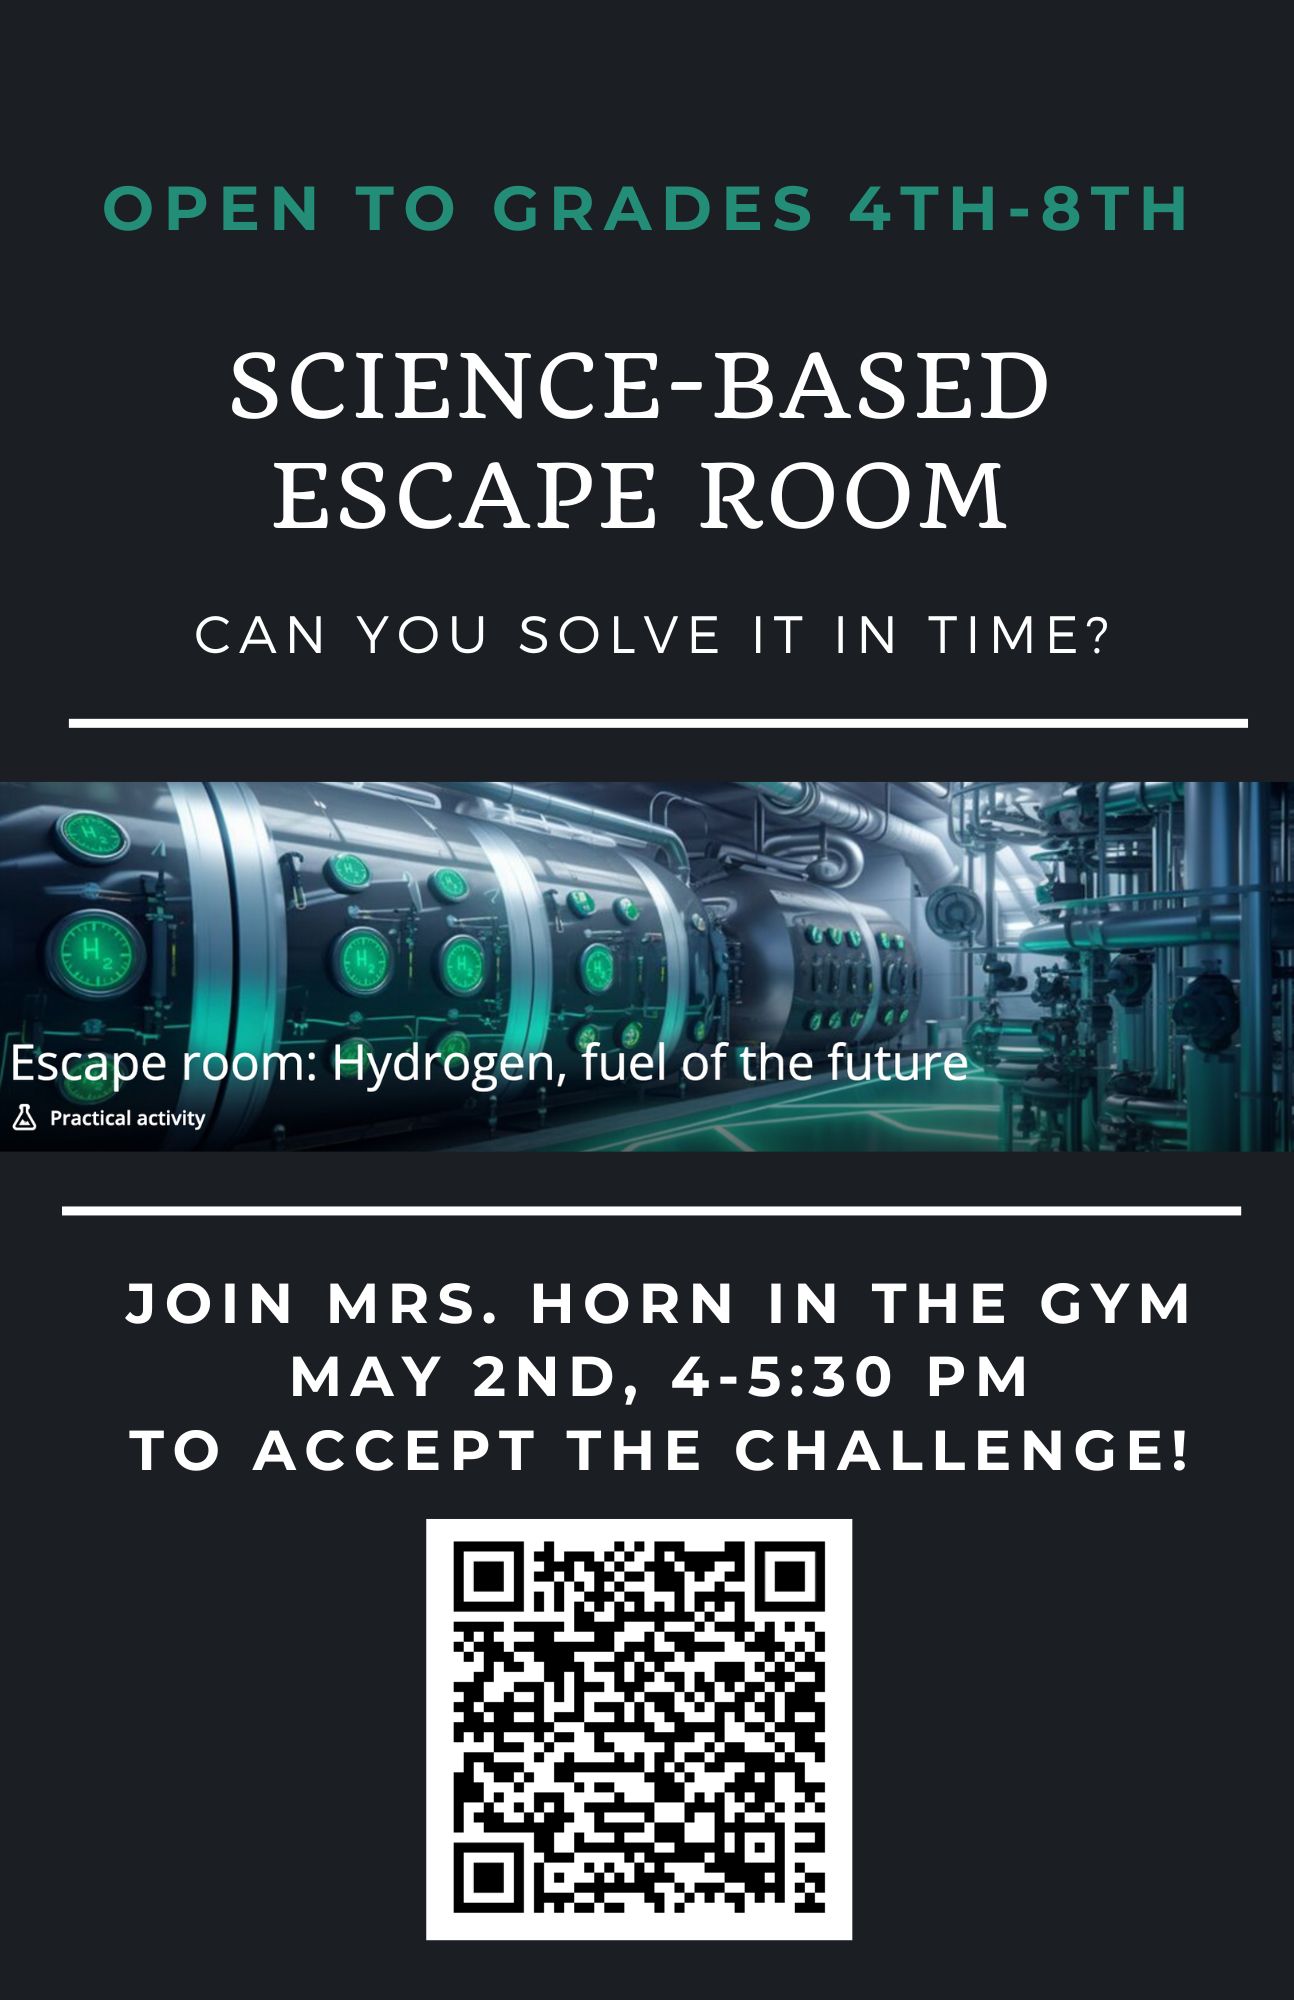 Flyer for a science based escape room